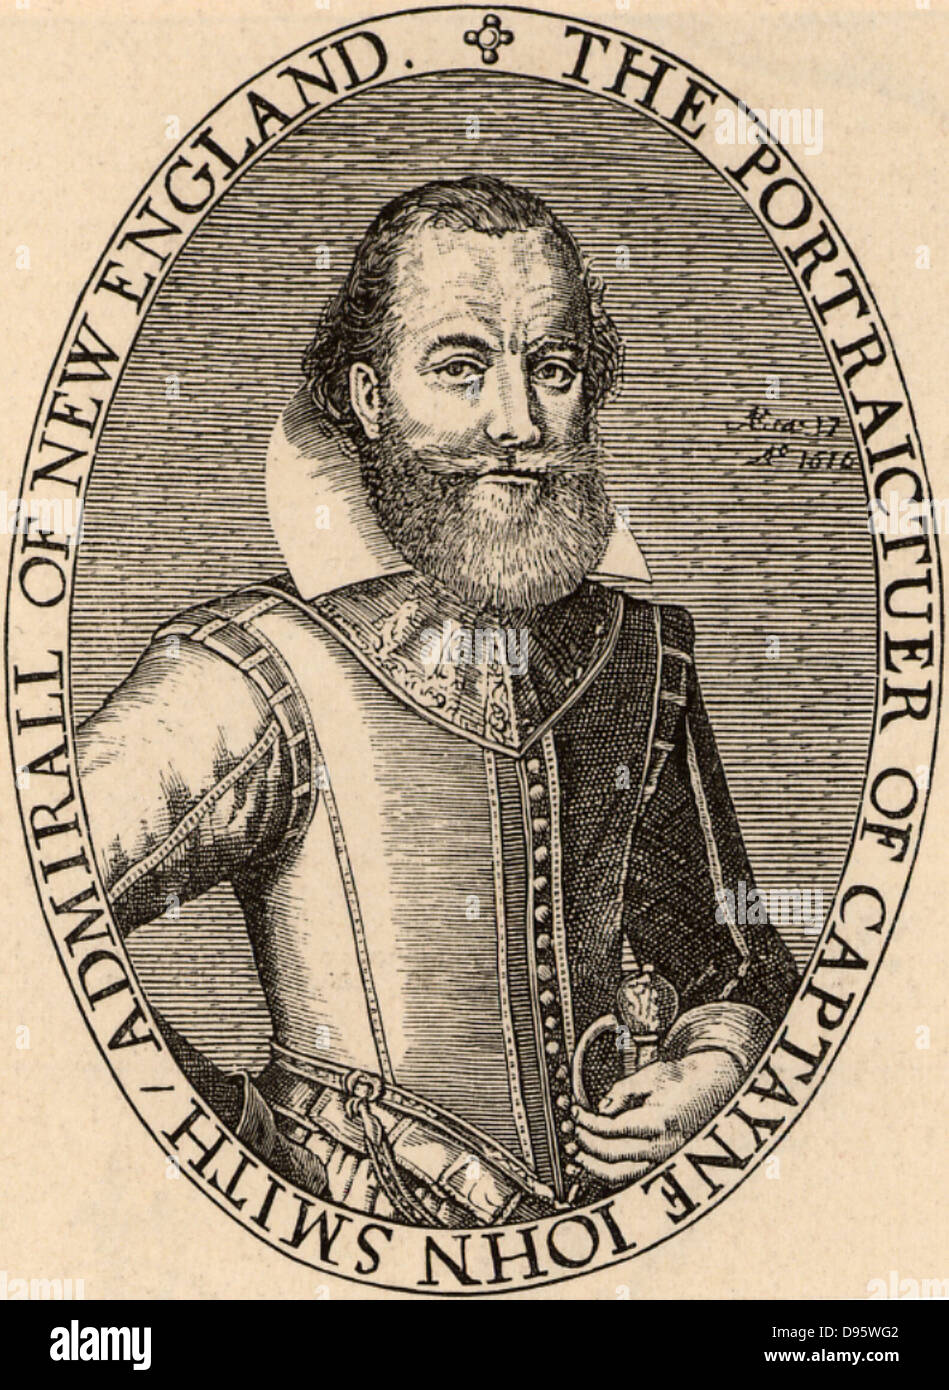 John Smith (1580-1631) English colonist and adventurer who sailed for Virginia in 1606. Based at Jamestown, he mapped Virginia.  Taken prisoner by the Native American chief Powhatan, according to legend his life was saved by Powhatan's daughter Pocahontas (c1595-1617). Portrait engraving from his map of Virginia (1612). Stock Photo